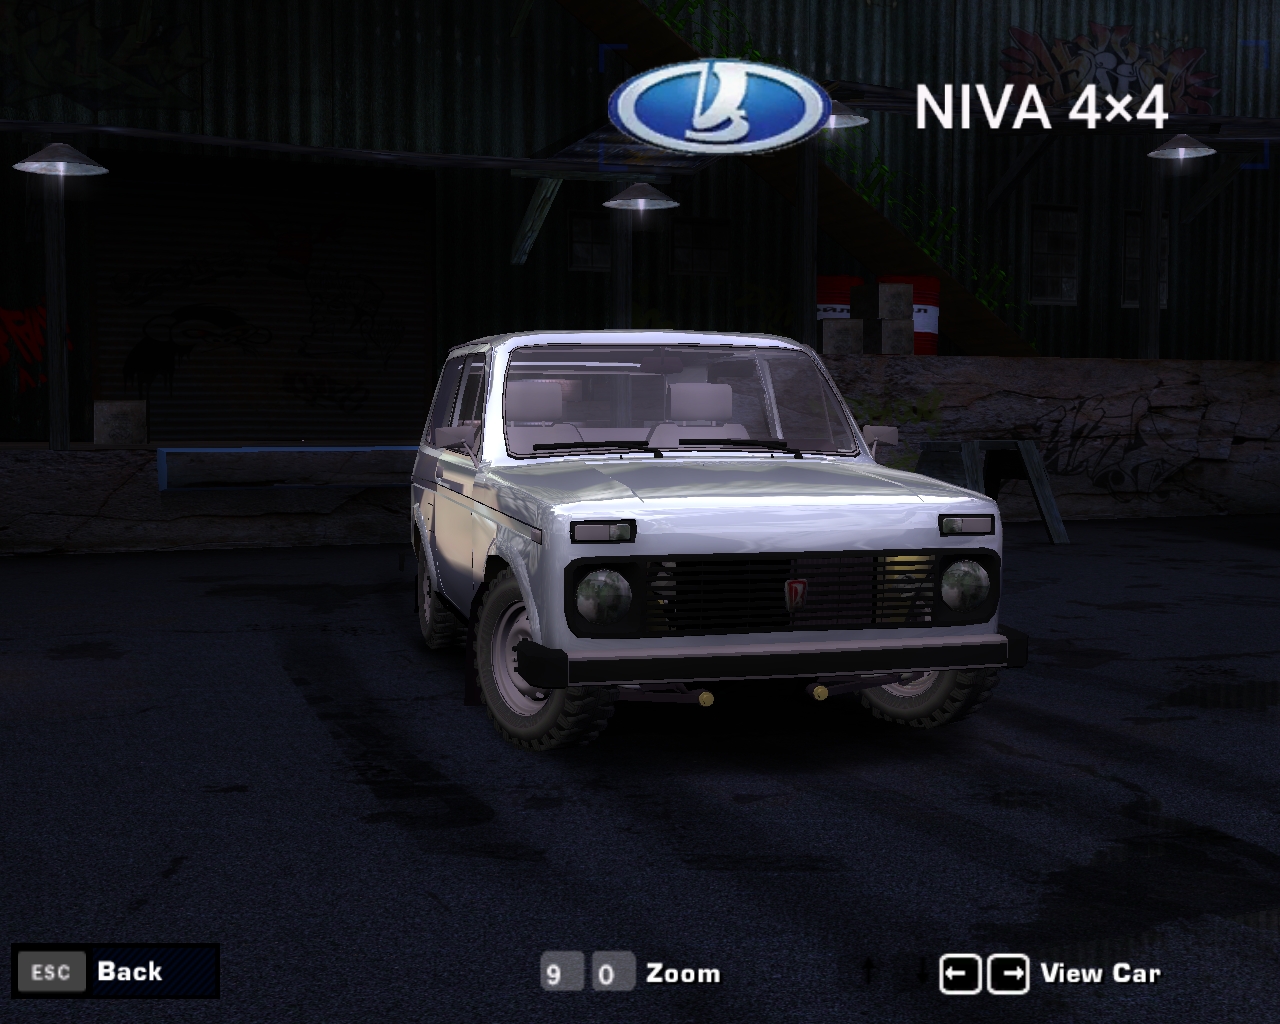 Lada Niva 4x4 By Lrf Modding Need For Speed Most Wanted Nfscars Images, Photos, Reviews